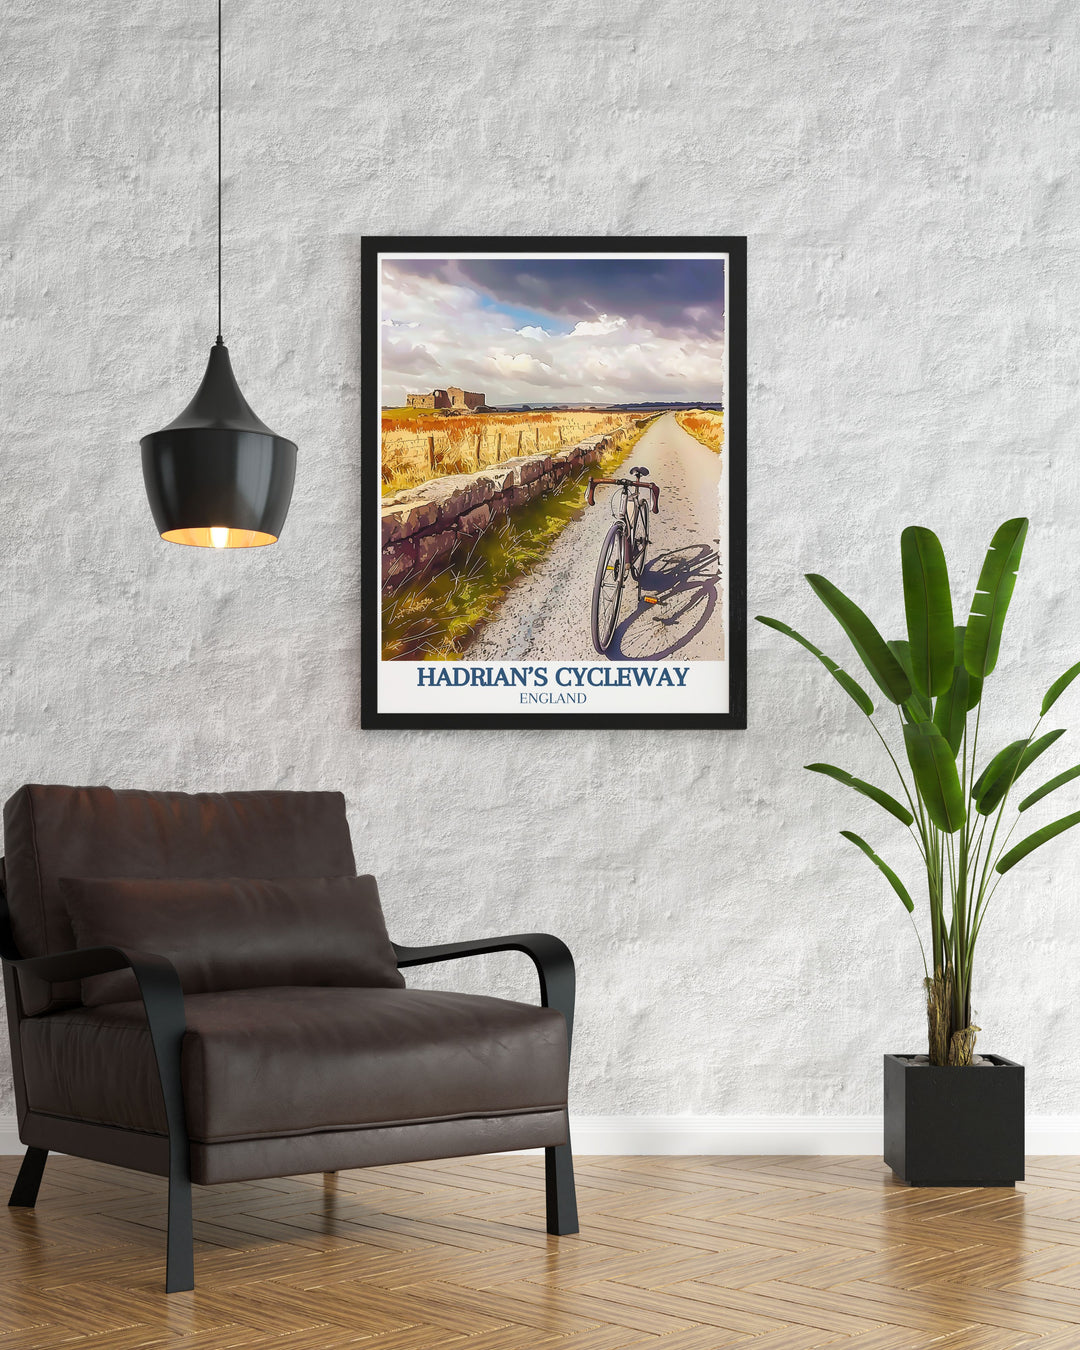 The travel poster of Hadrians Cycleway features the scenic route along Hadrians Wall, highlighting the historical and natural beauty of Northern England, perfect for adventure lovers.